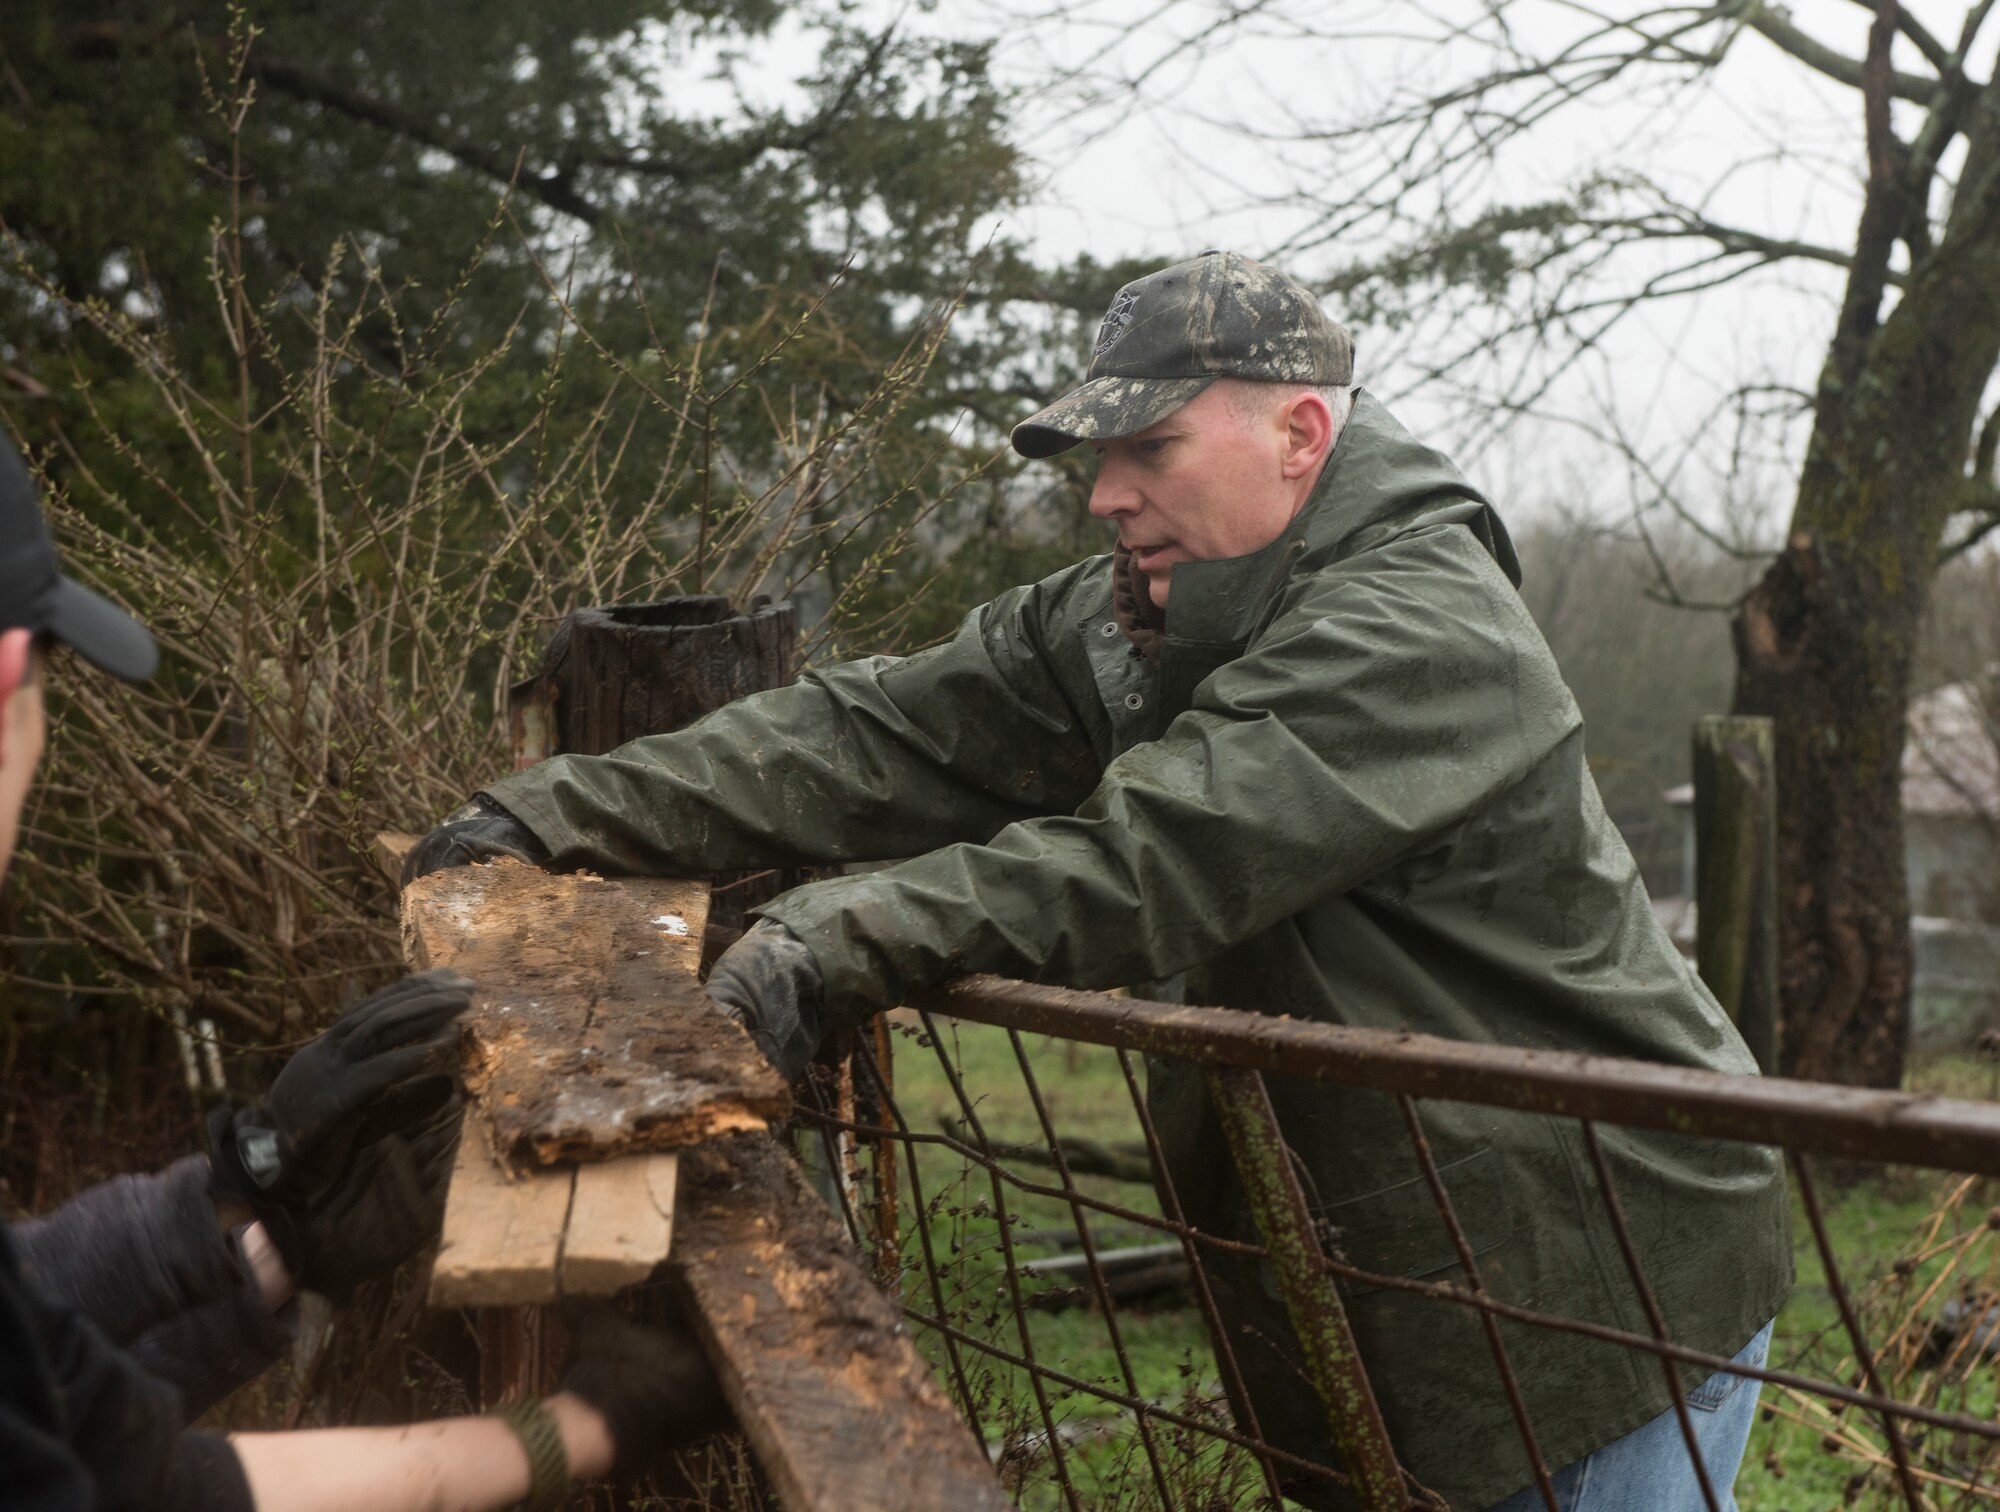 Air Force Col. Christopher Callis, 509th Mission Support Group commander, hands scrap wood to another volunteer on March 30, 2019, on a farm in Knob Noster, Missouri.